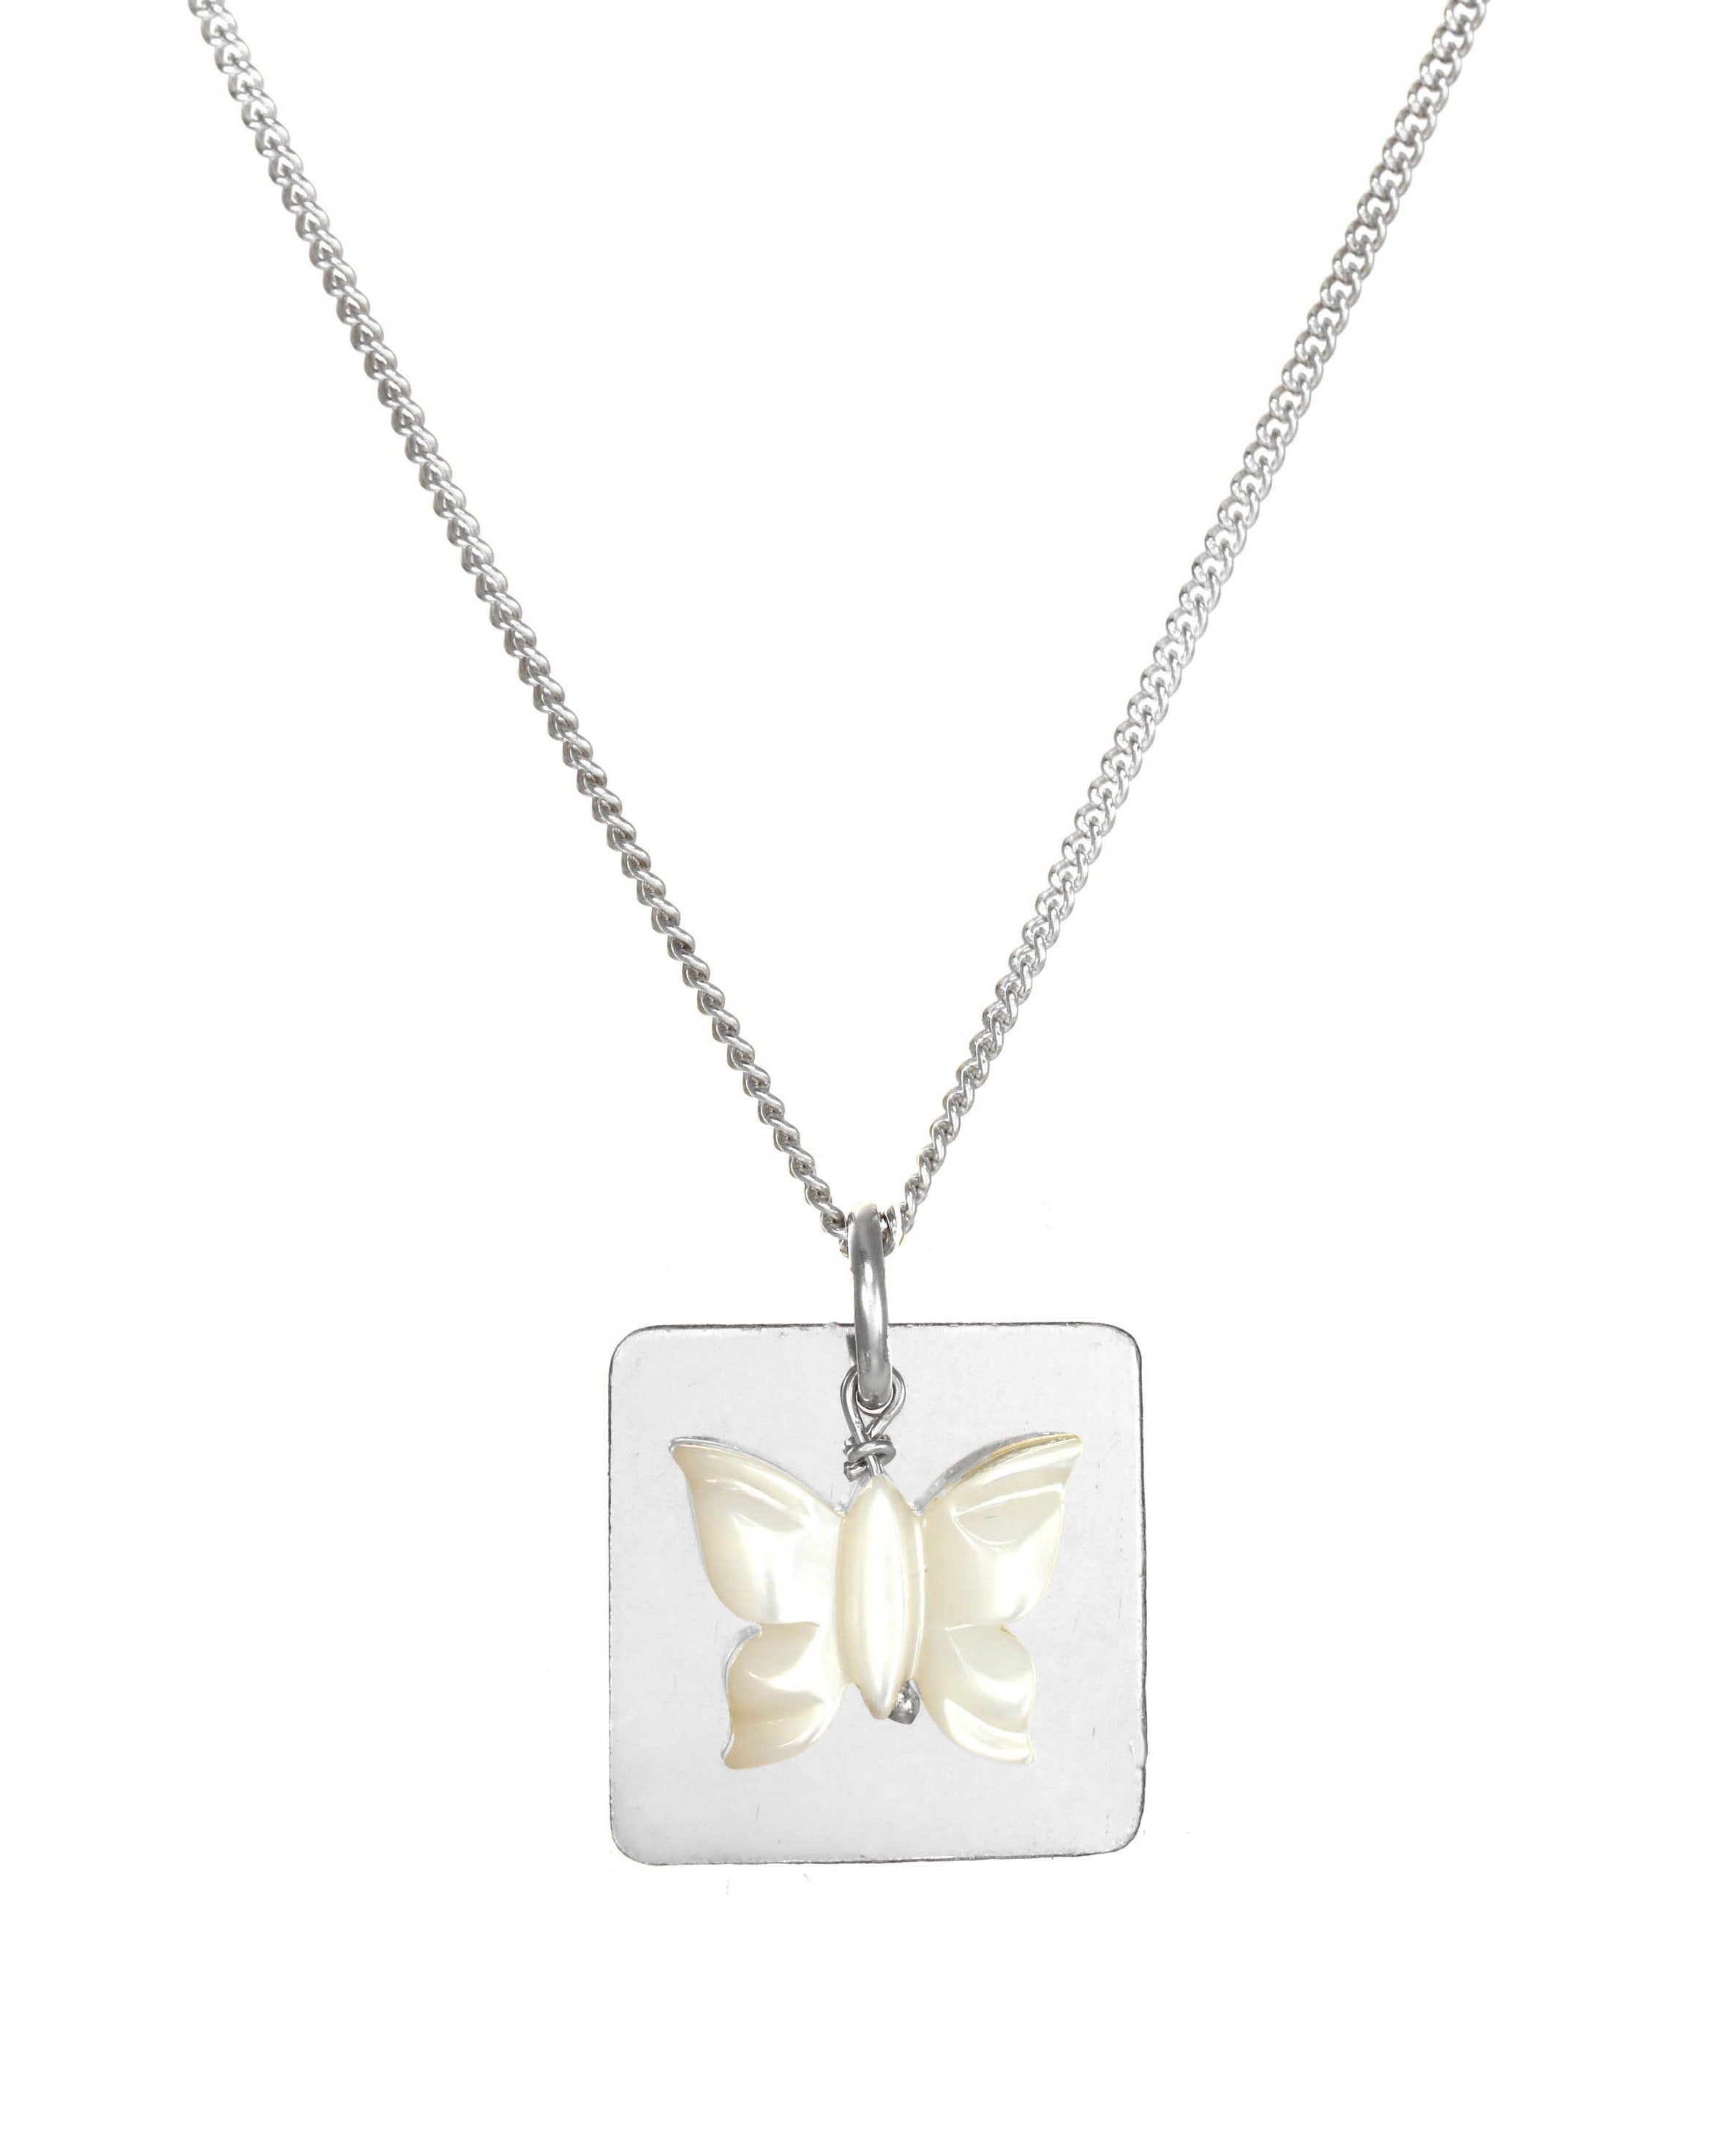 Esperanza Necklace by KOZAKH. An 18 to 20 inch adjustable length necklace in Sterling Silver, featuring a Mother of pearl butterfly charm and a 16mm Square pendant.